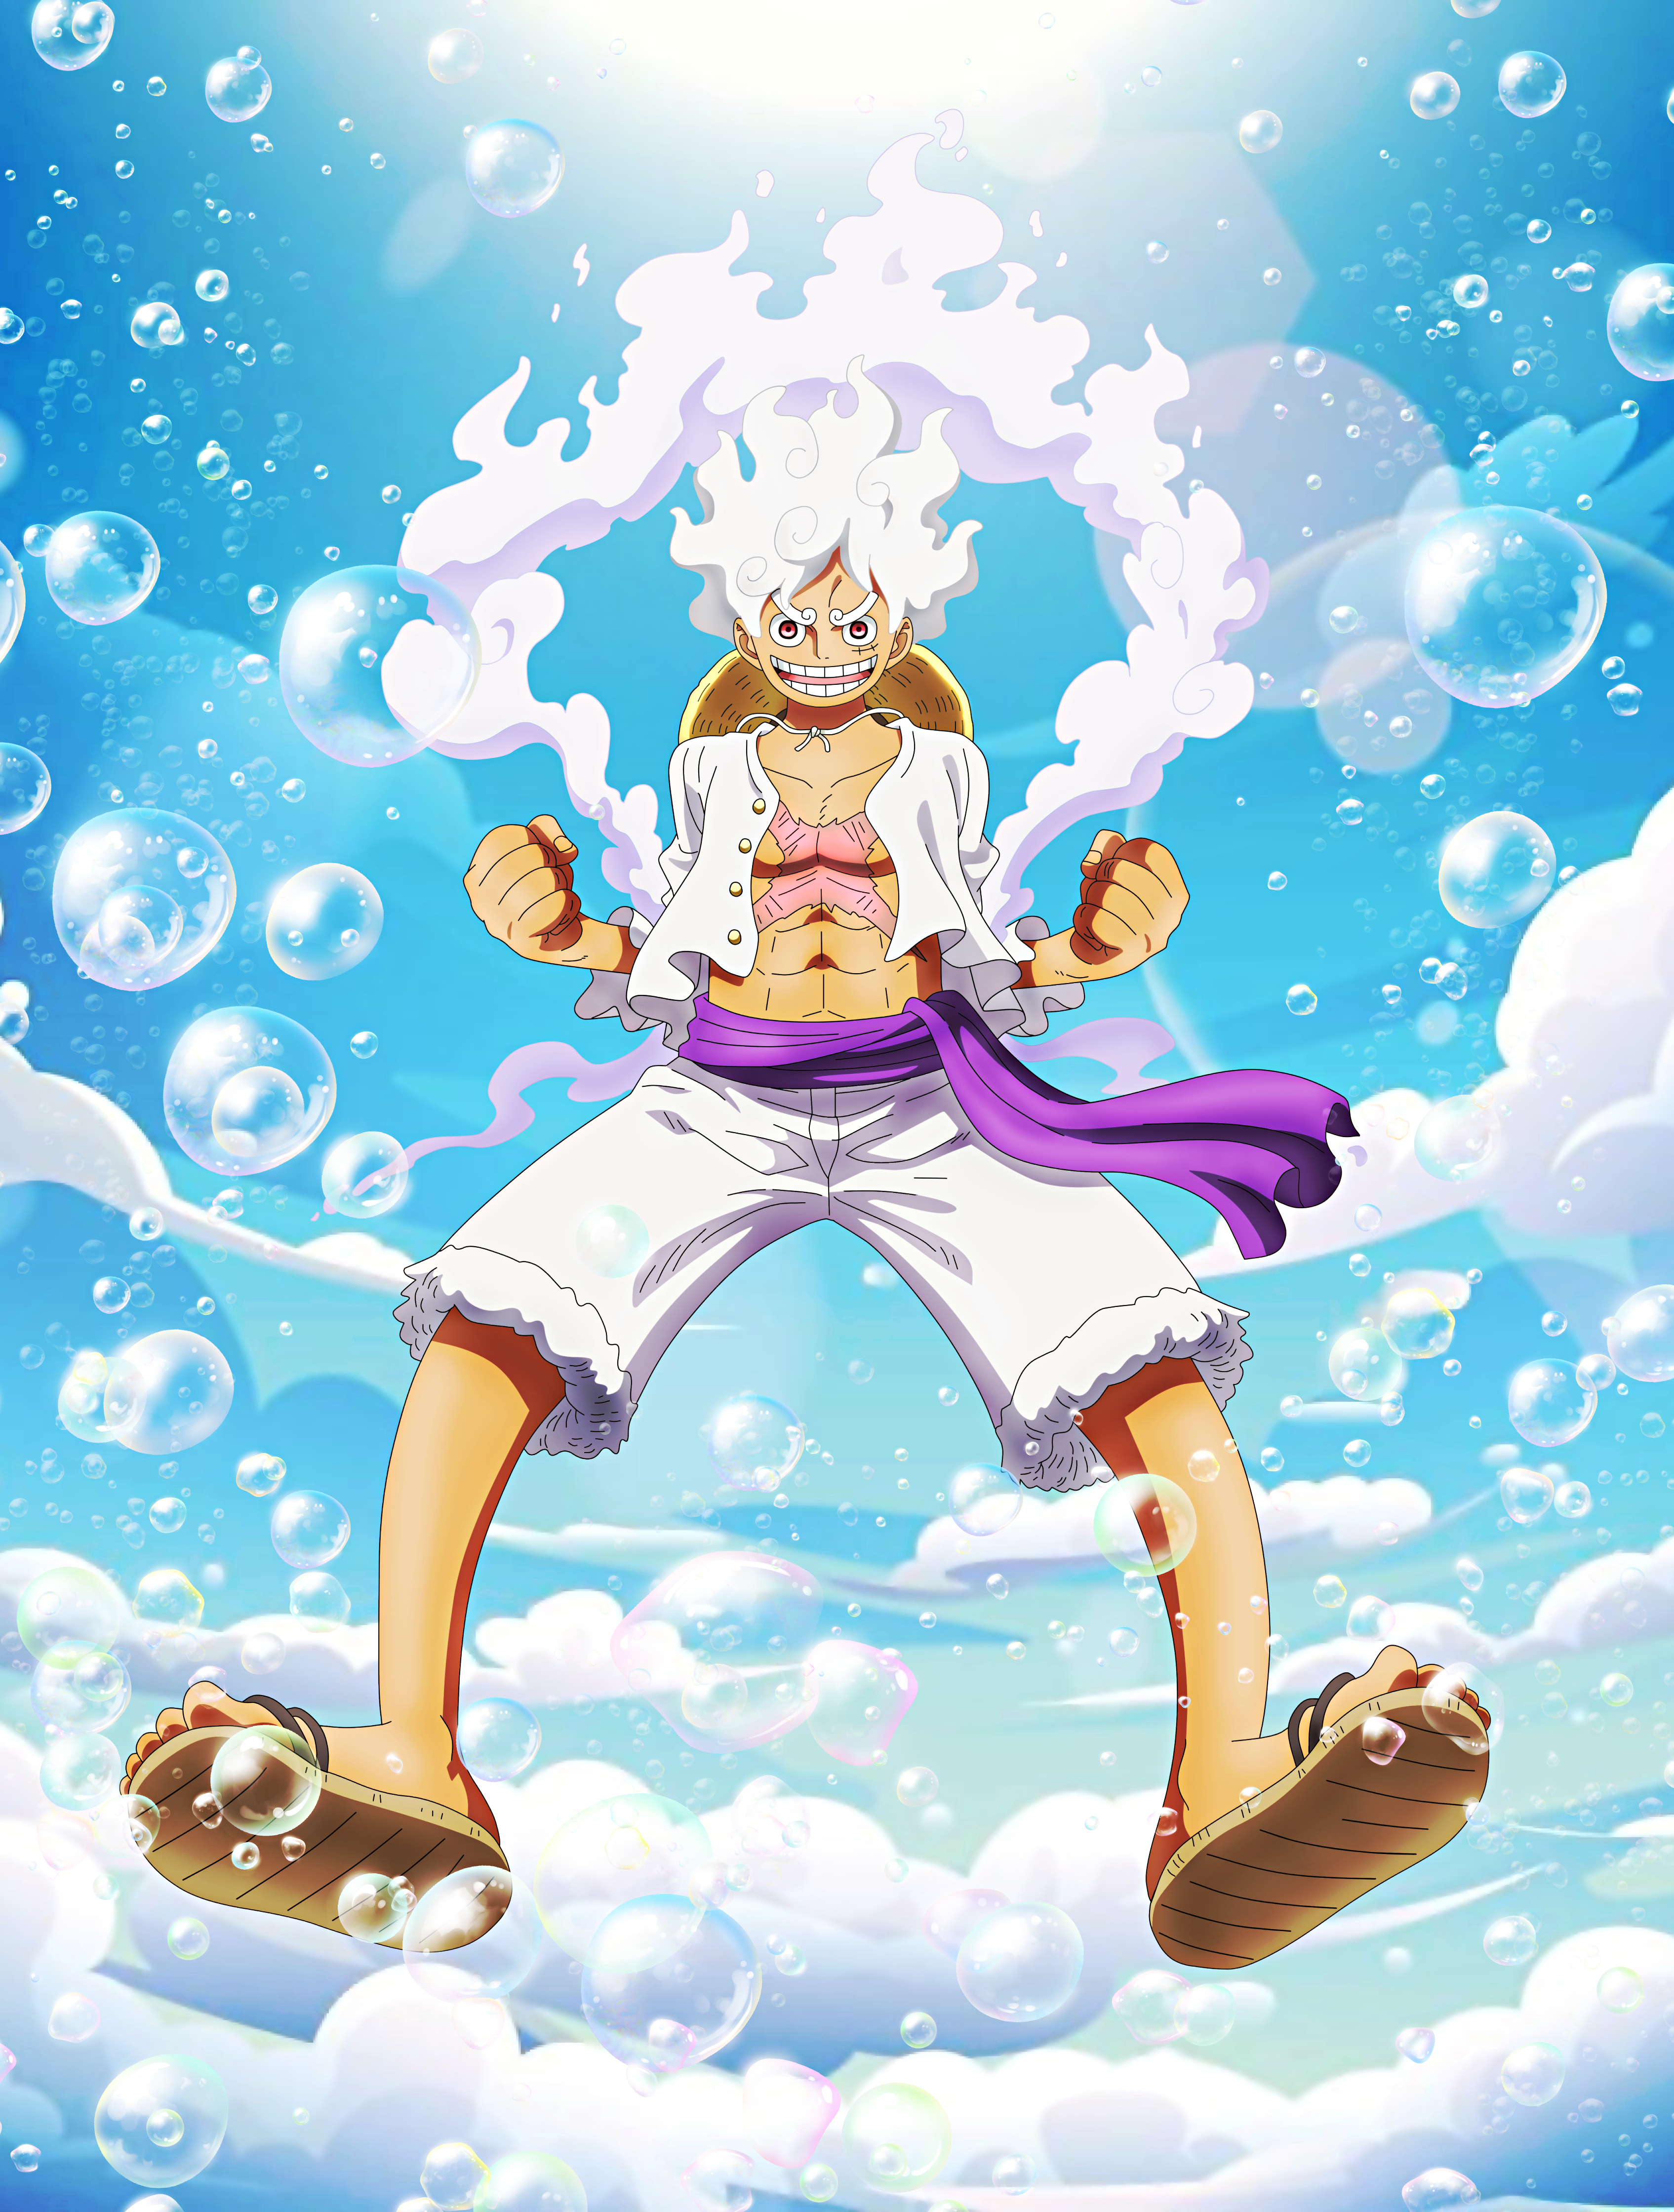 Luffy Gear 5 by DT501061 余佳軒